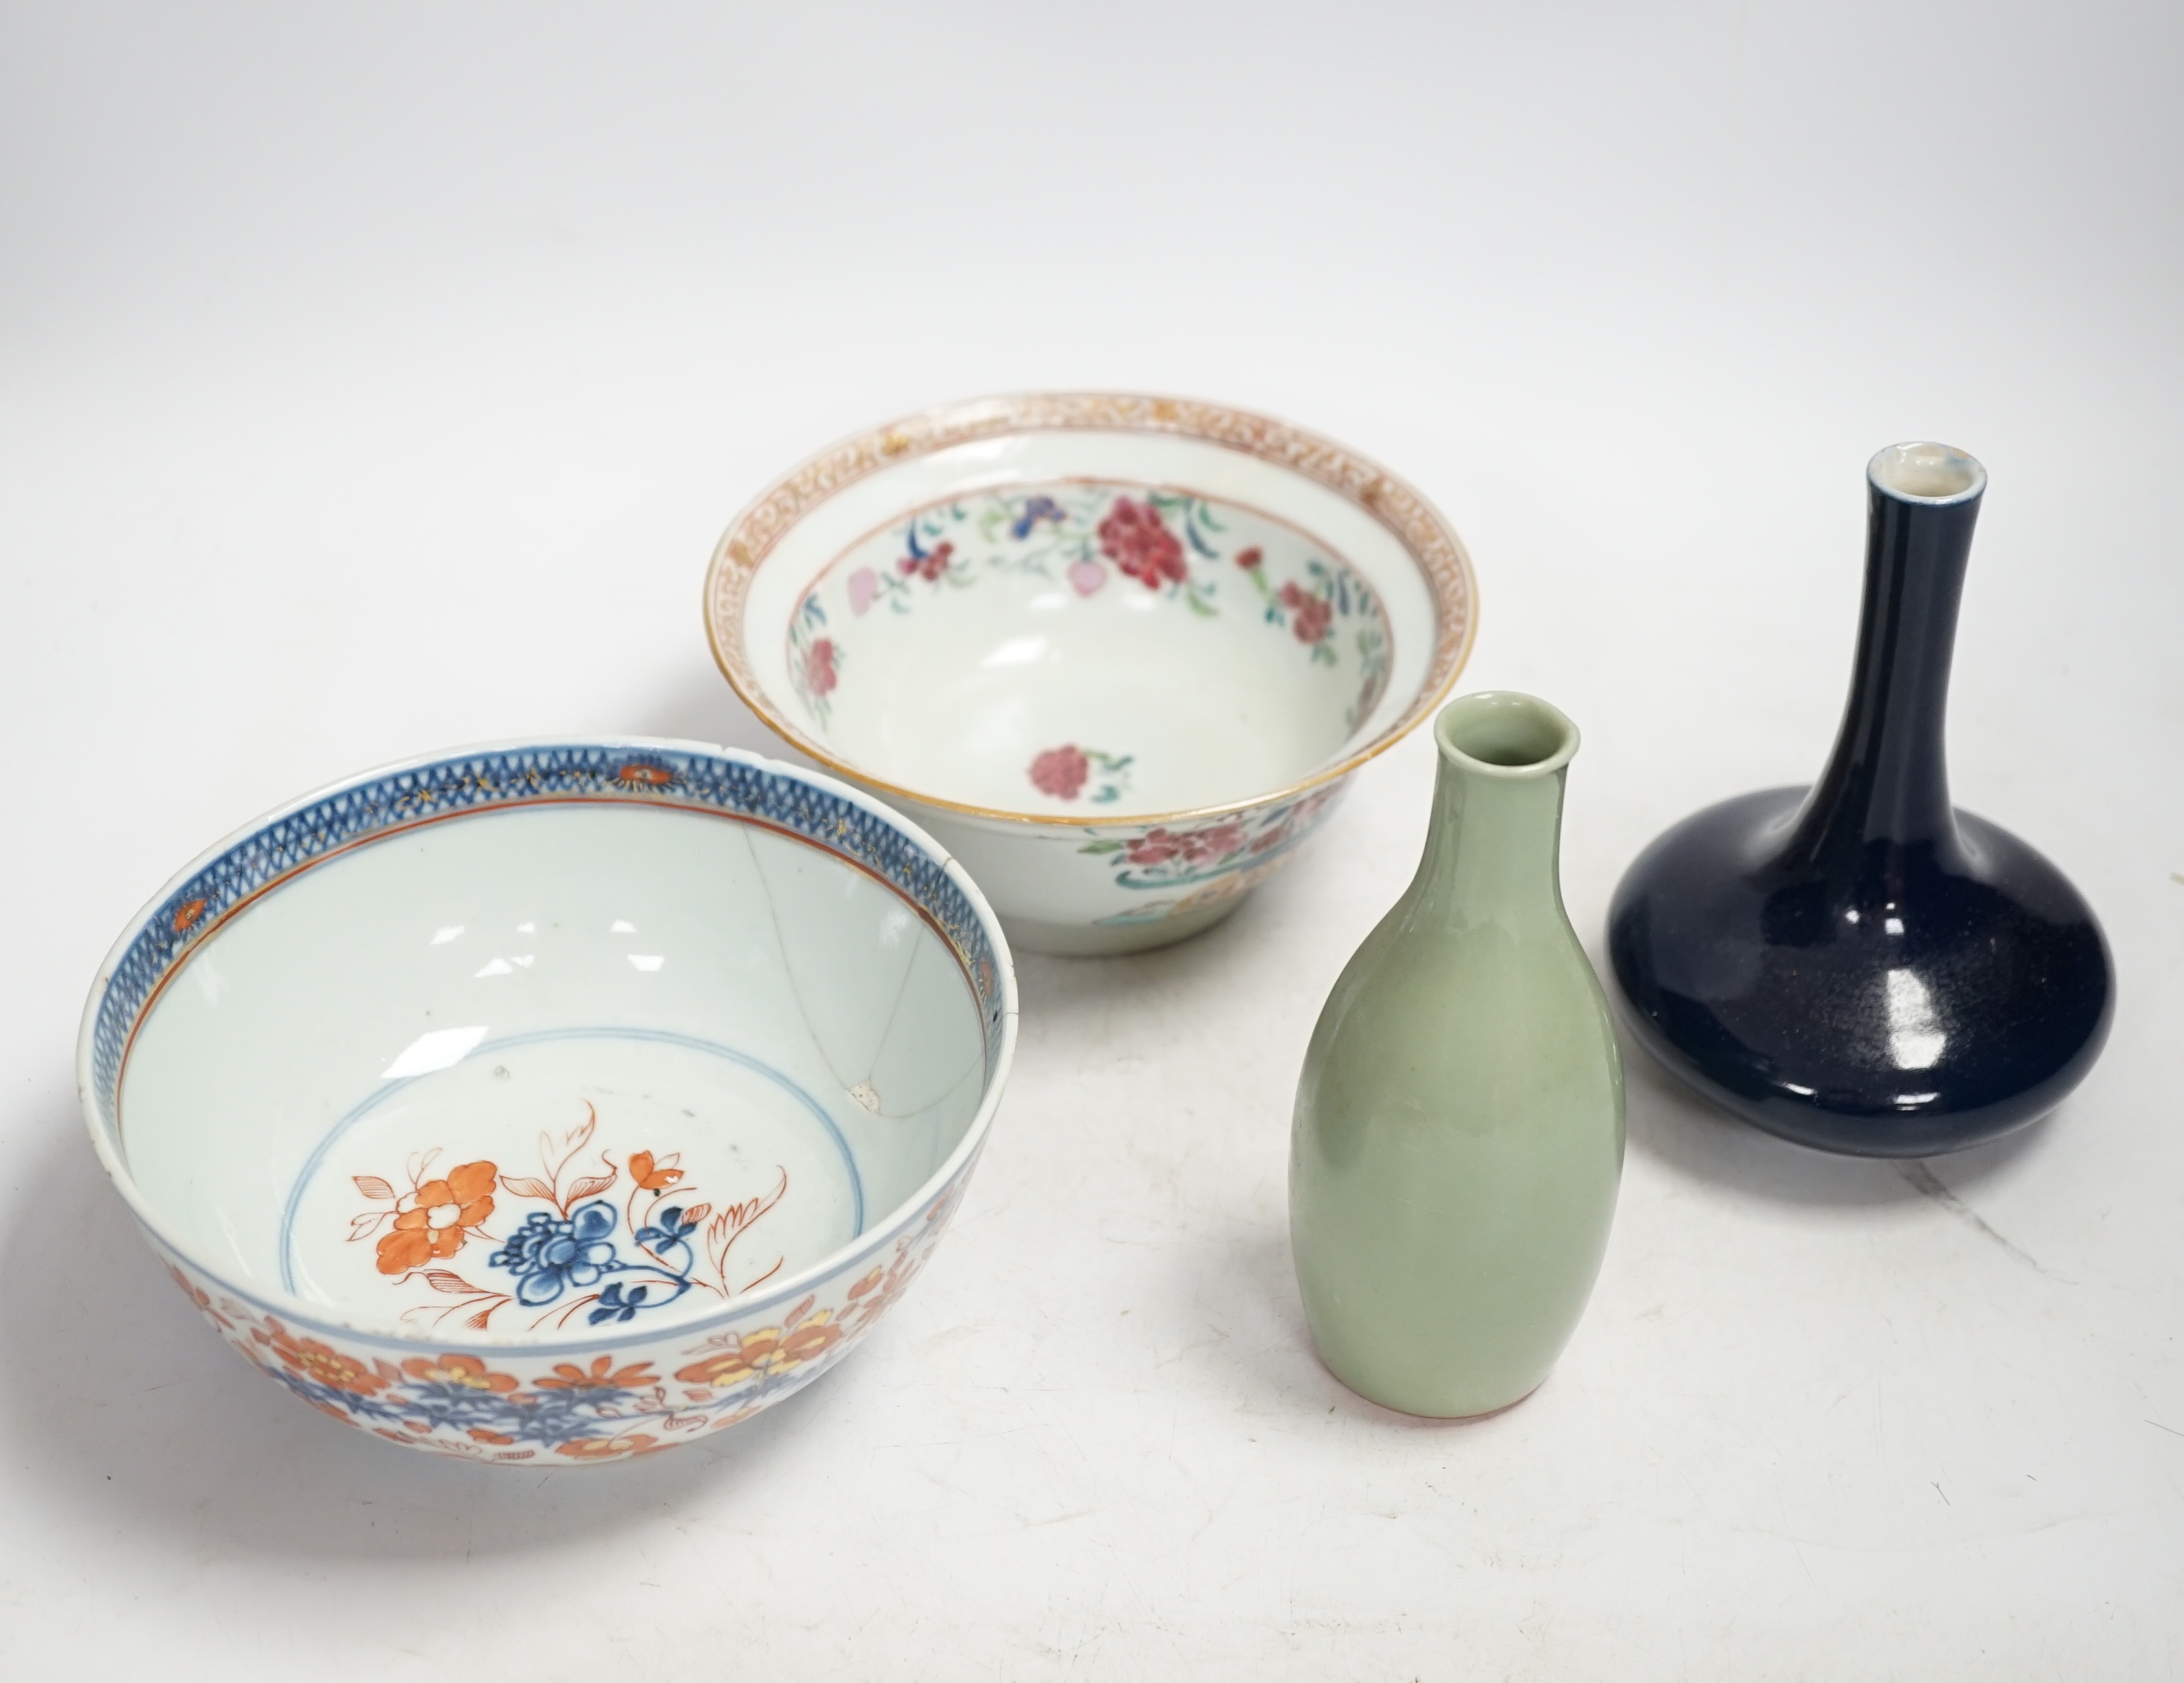 A Chinese famille rose bowl, an Imari patterned bowl, a small blue glazed vase and a similar celadon glazed vase, 18th century and later. Condition - both bowls badly cracked, overall poor